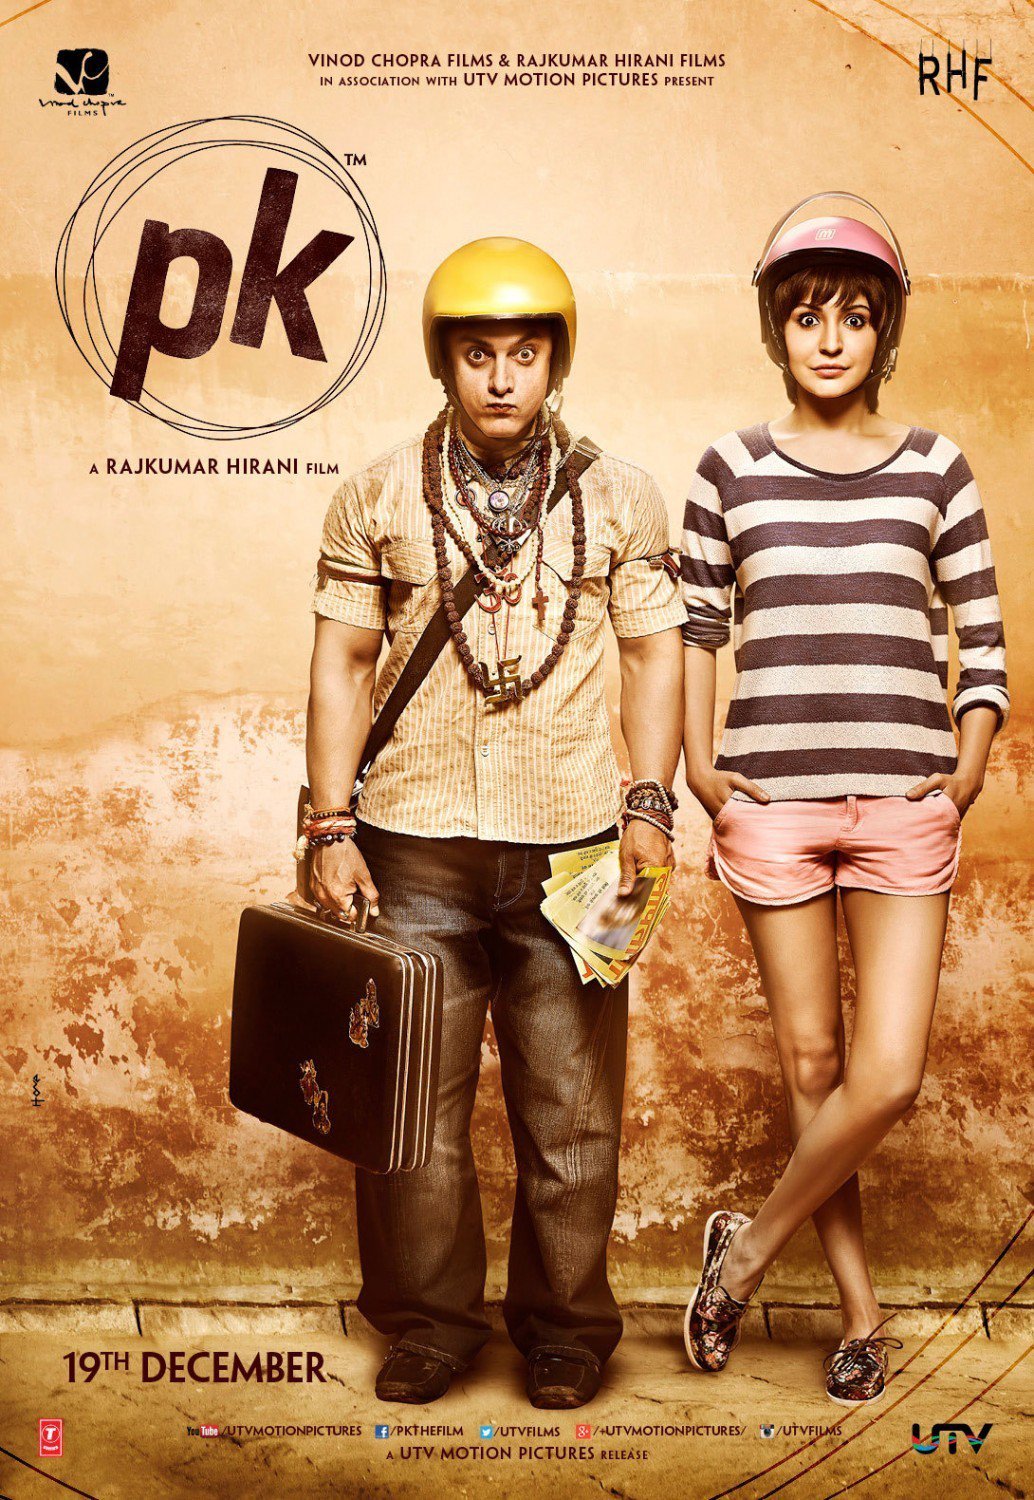 Poster for the movie "PK"